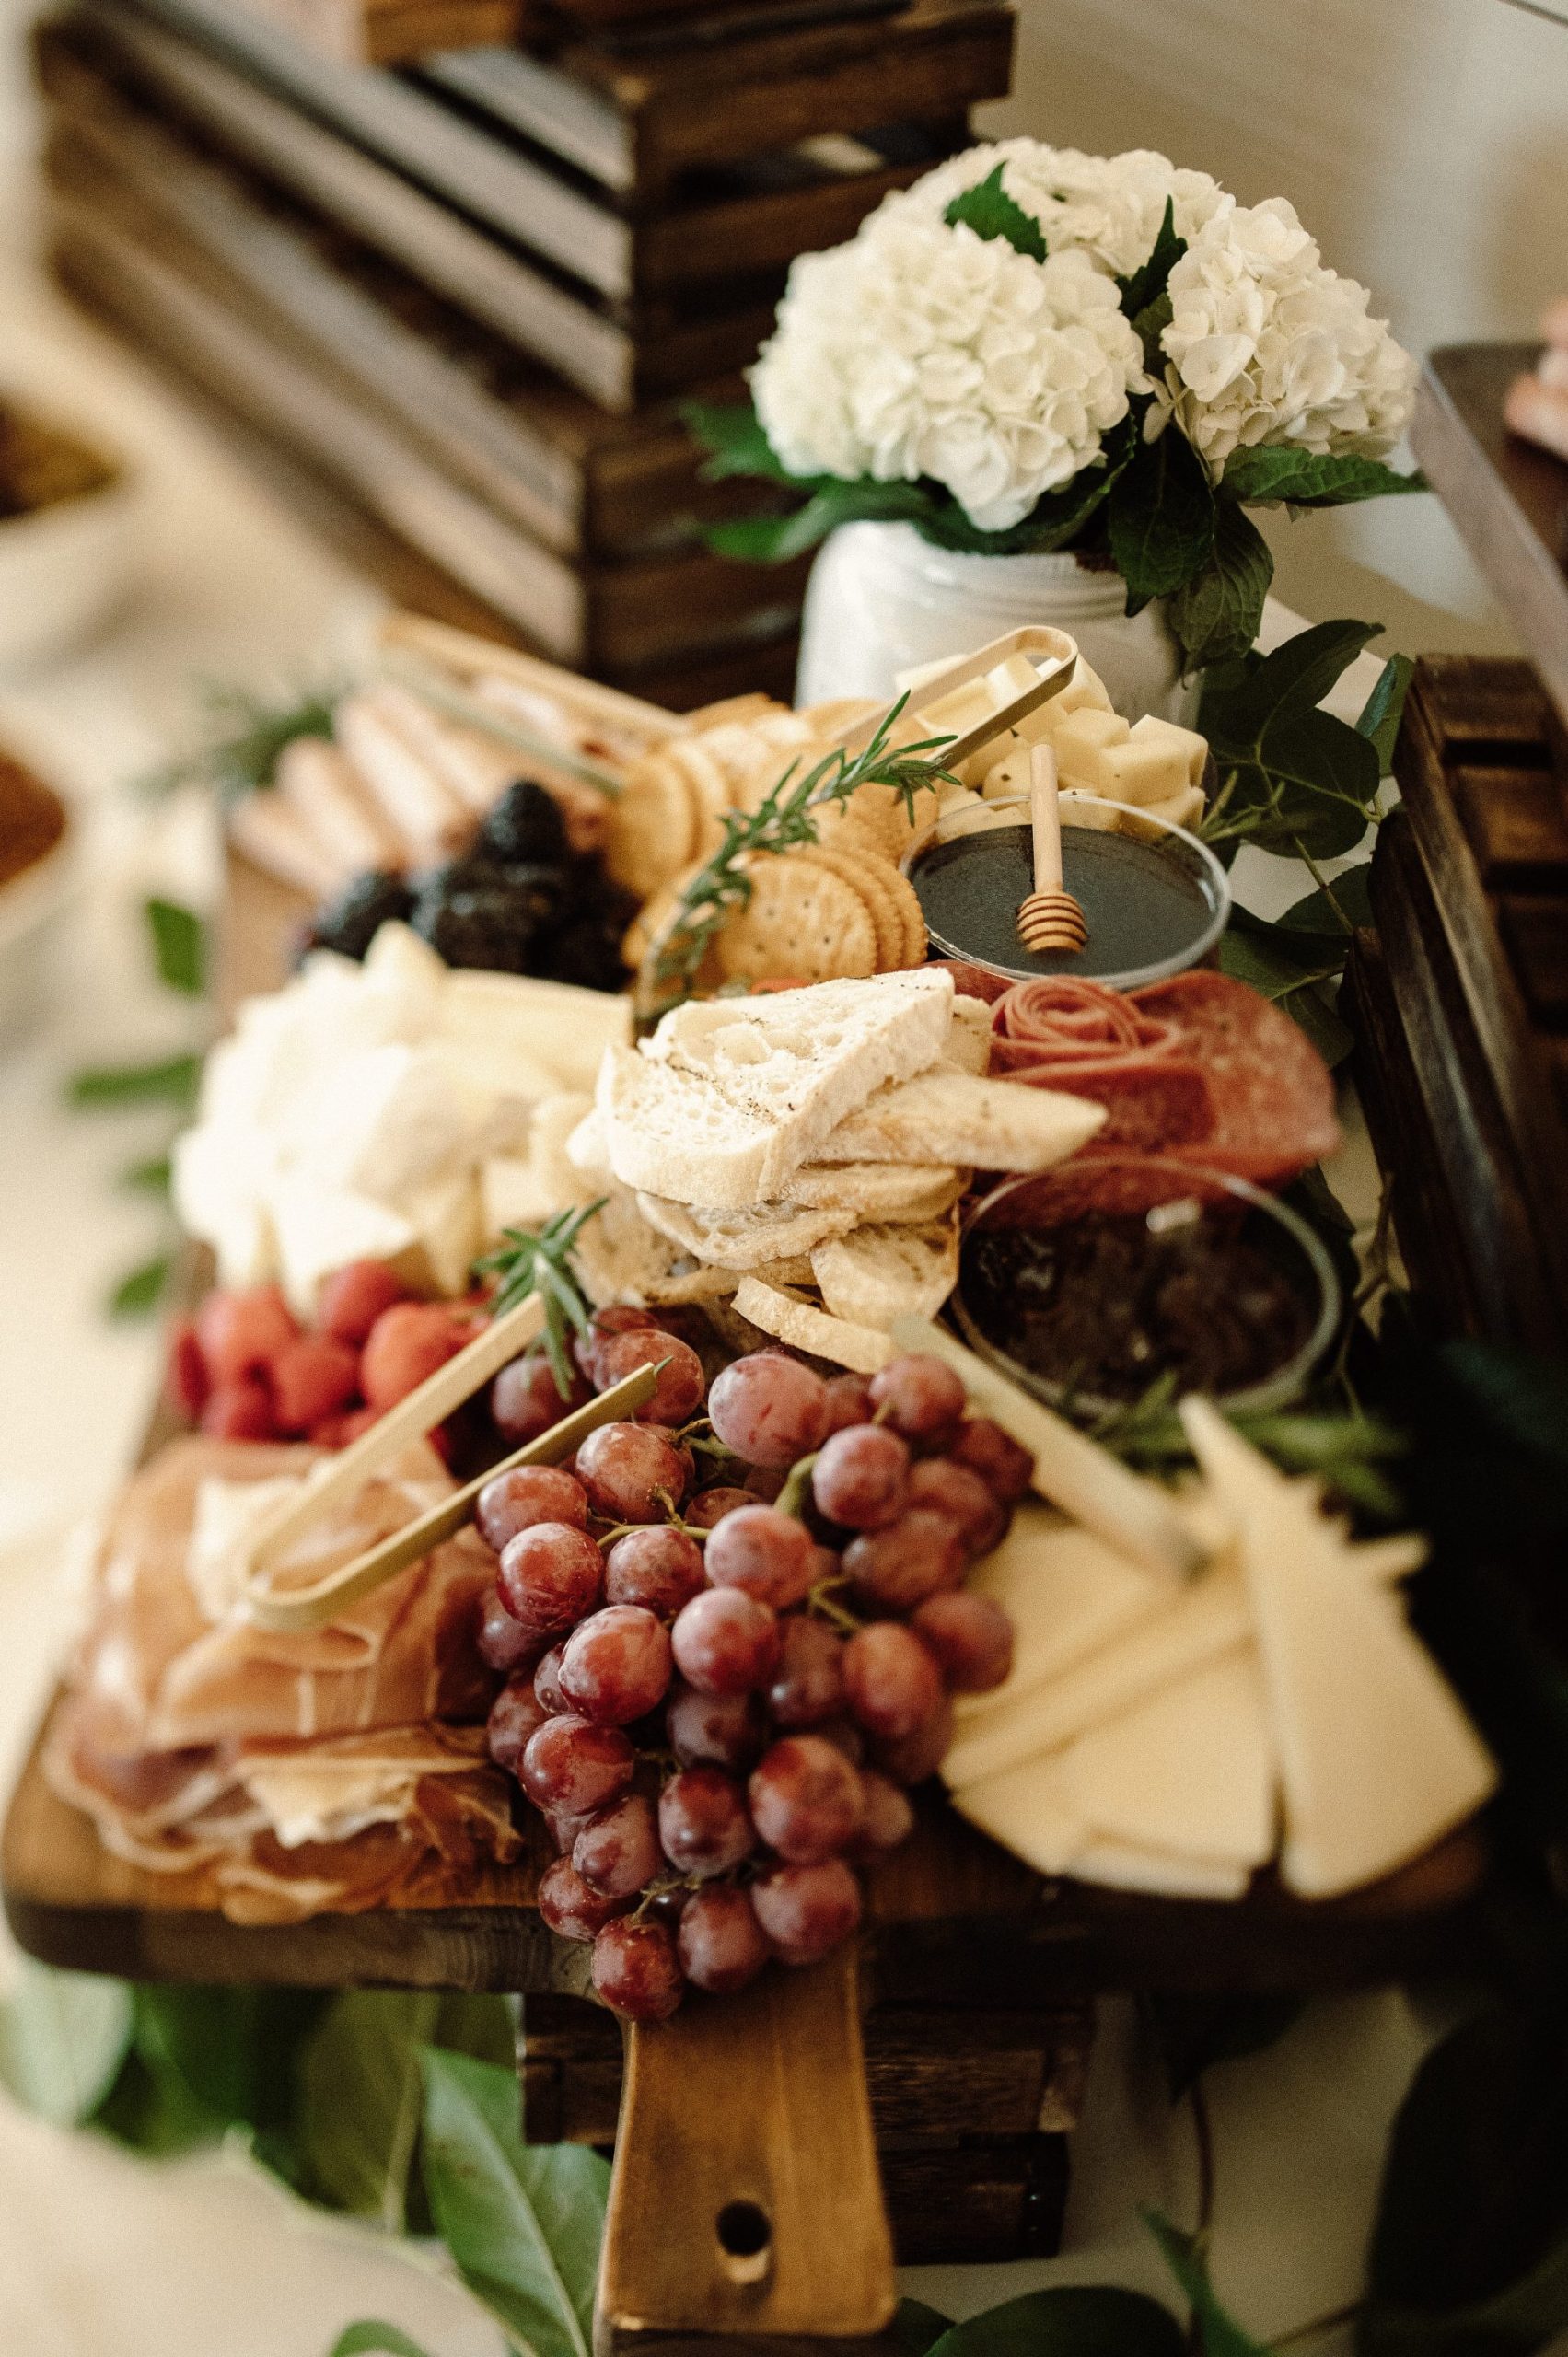 Charcuterie Display with various cheeses, grapes, meats, crackers and sauces